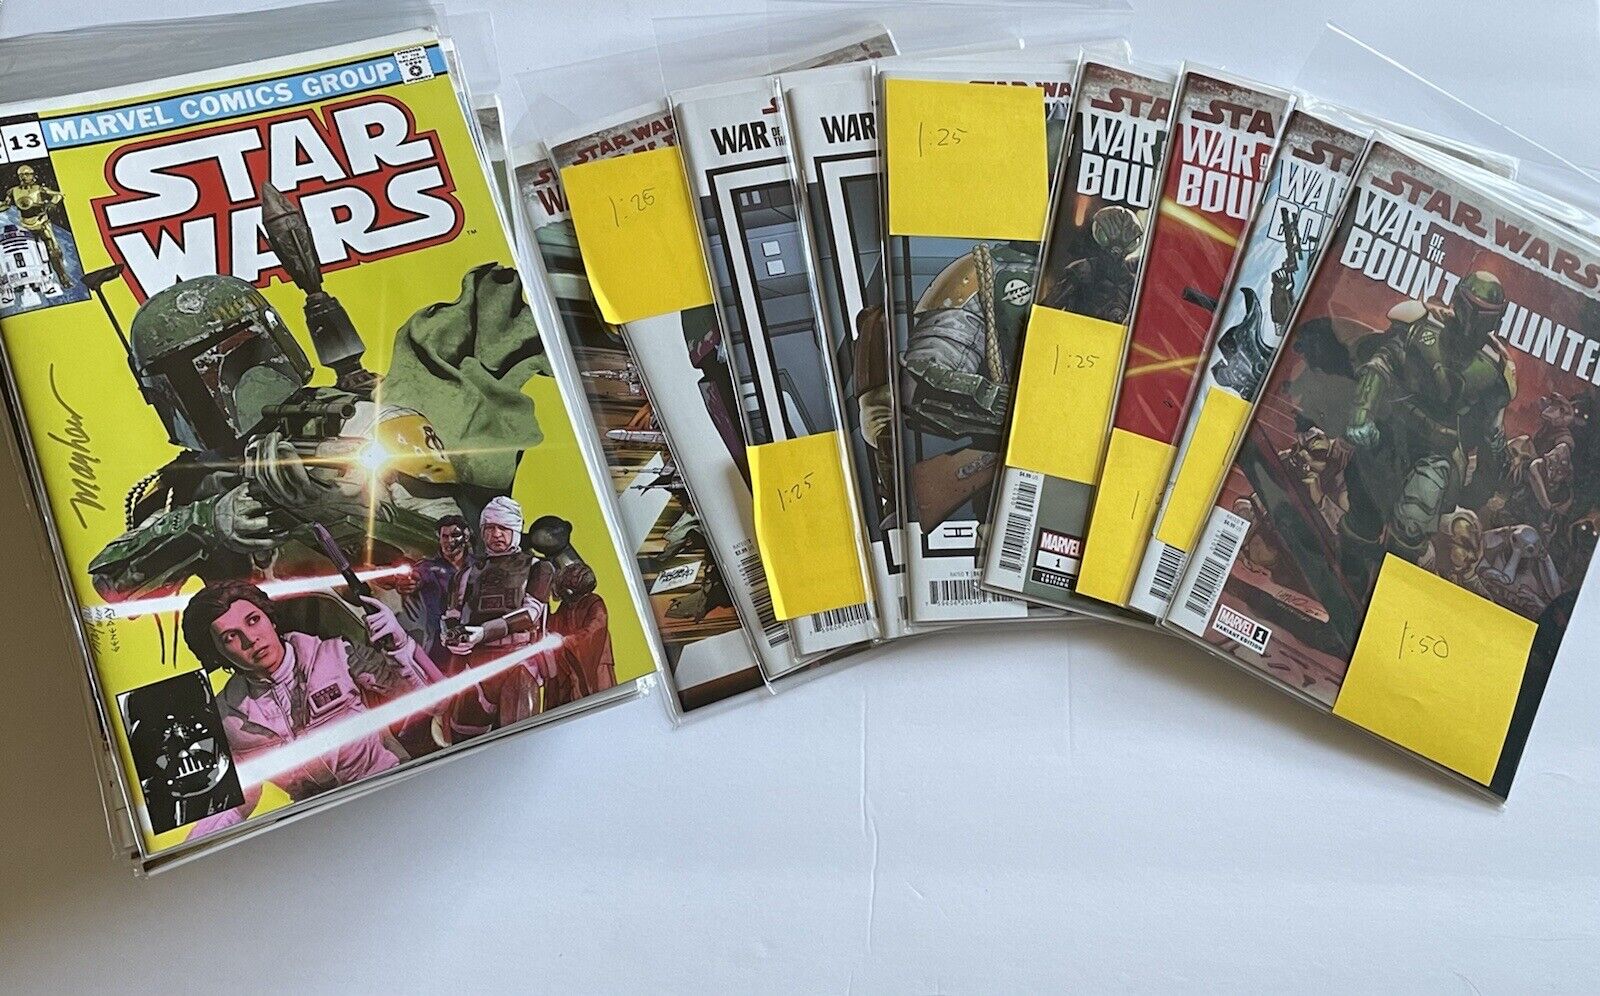 STAR WARS WAR OF THE BOUNTY HUNTERS DIRECTOR’S CUT, VARIANT(S) LOT OF 60+ BOOKS